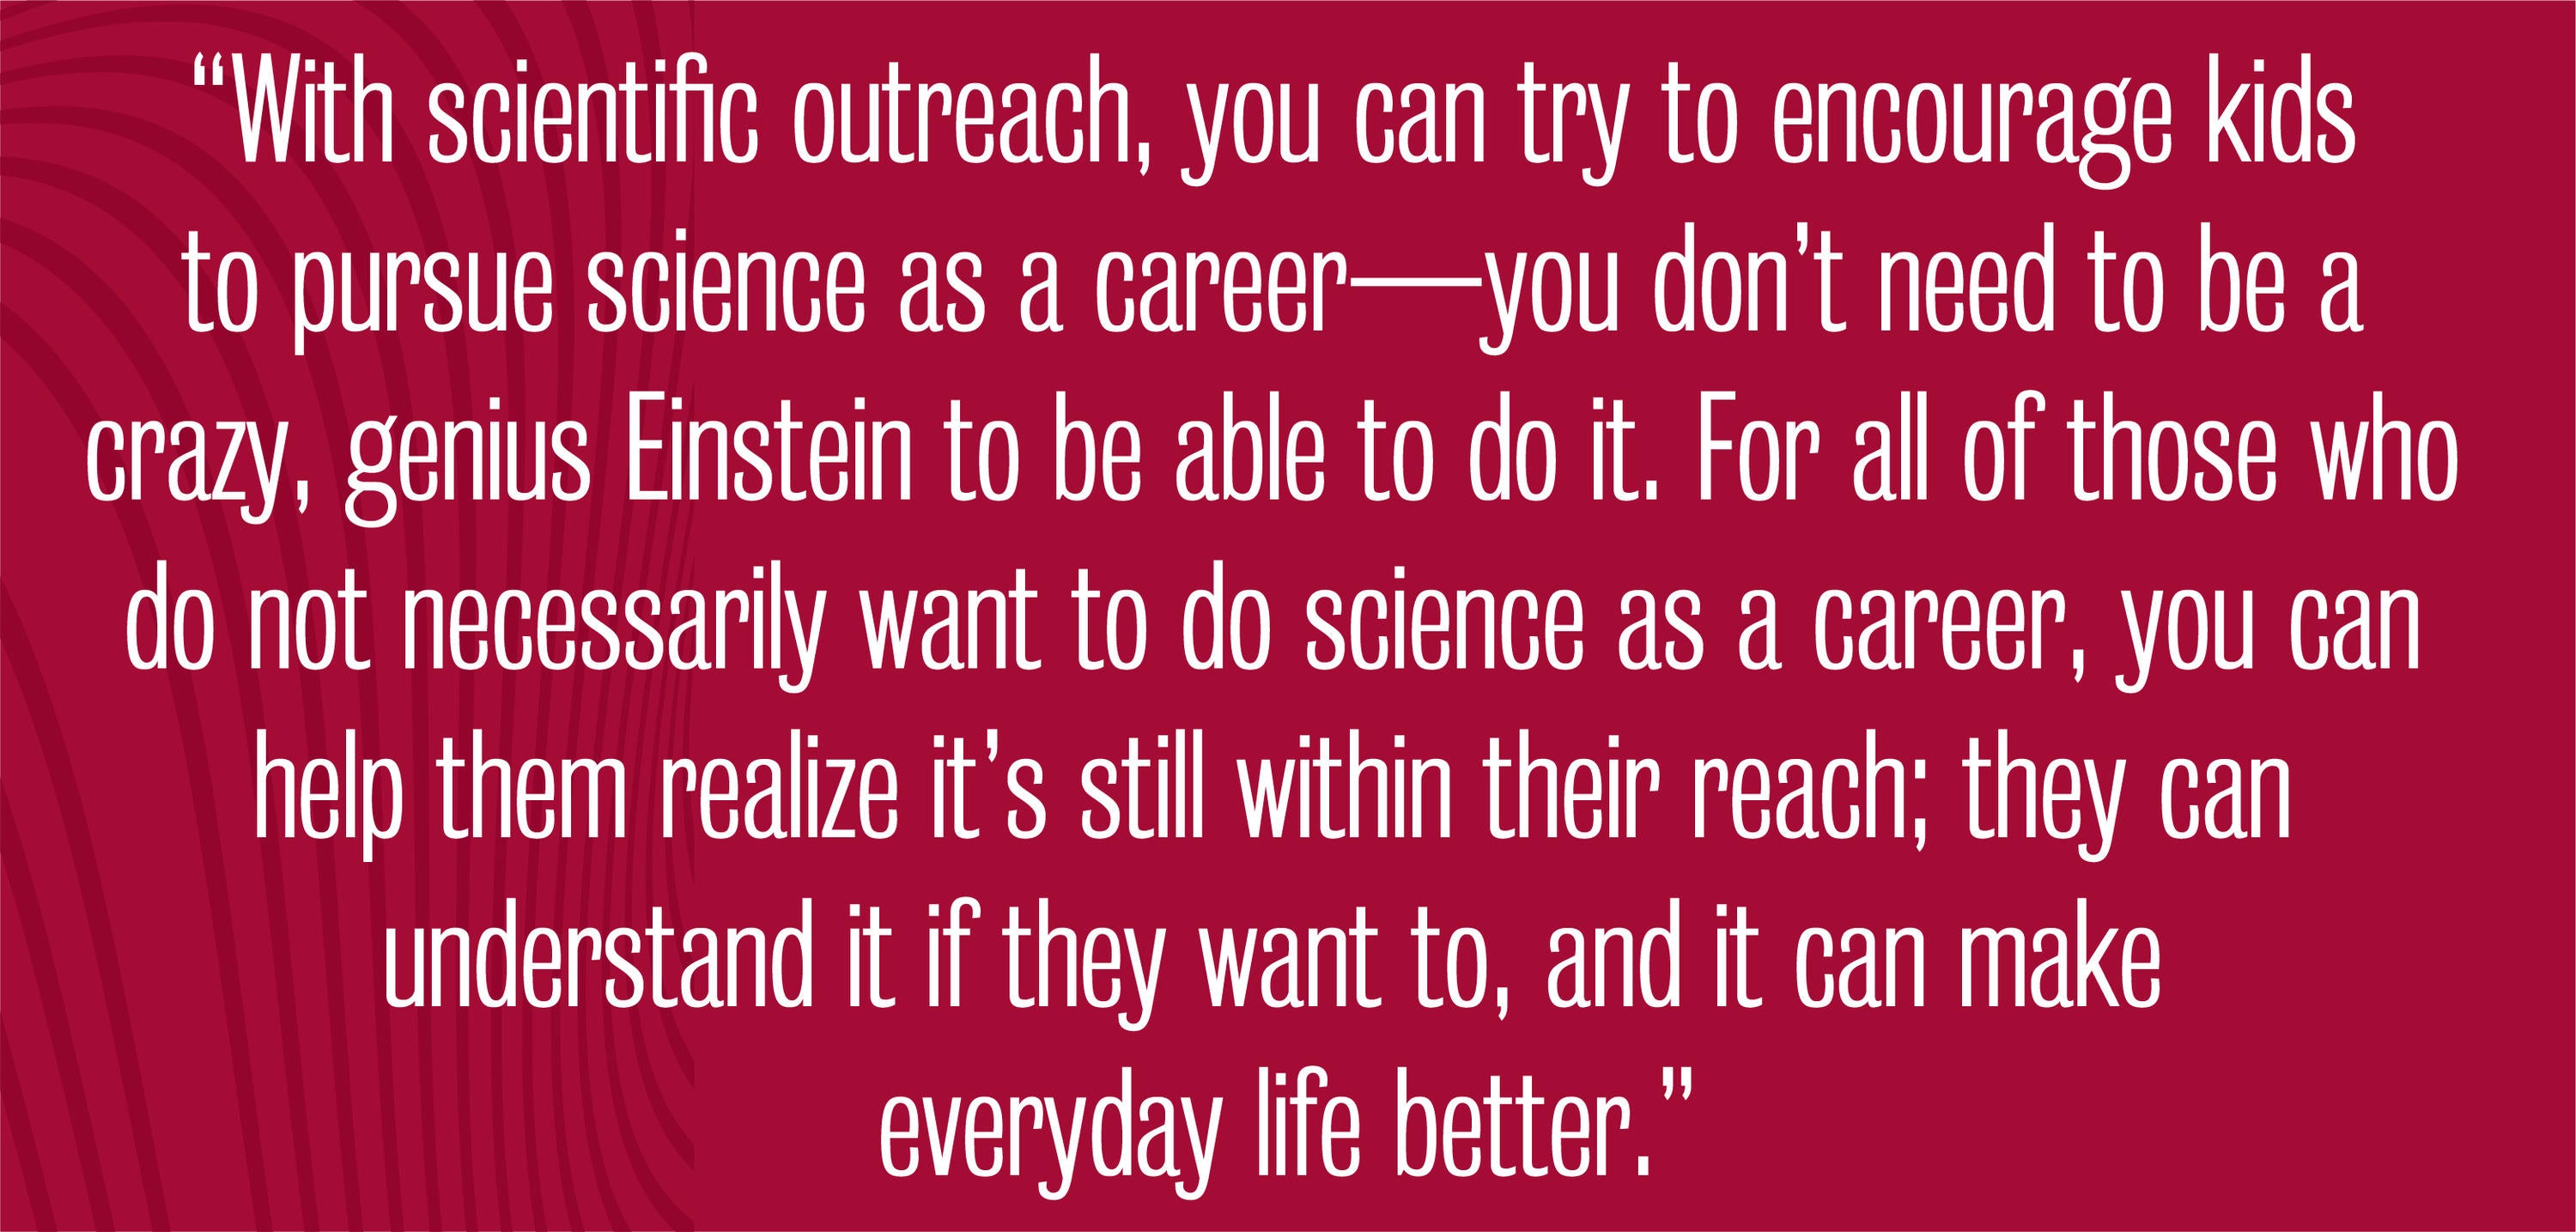 quote - With scientific outreach, you can try to encourage kids to pursue science as a career—you don’t need to be a crazy, genius Einstein to be able to do it. For all of those who do not necessarily want to do science as a career, you can help them realize it’s still within their reach; they can understand it if they want to, and it can make everyday life better.